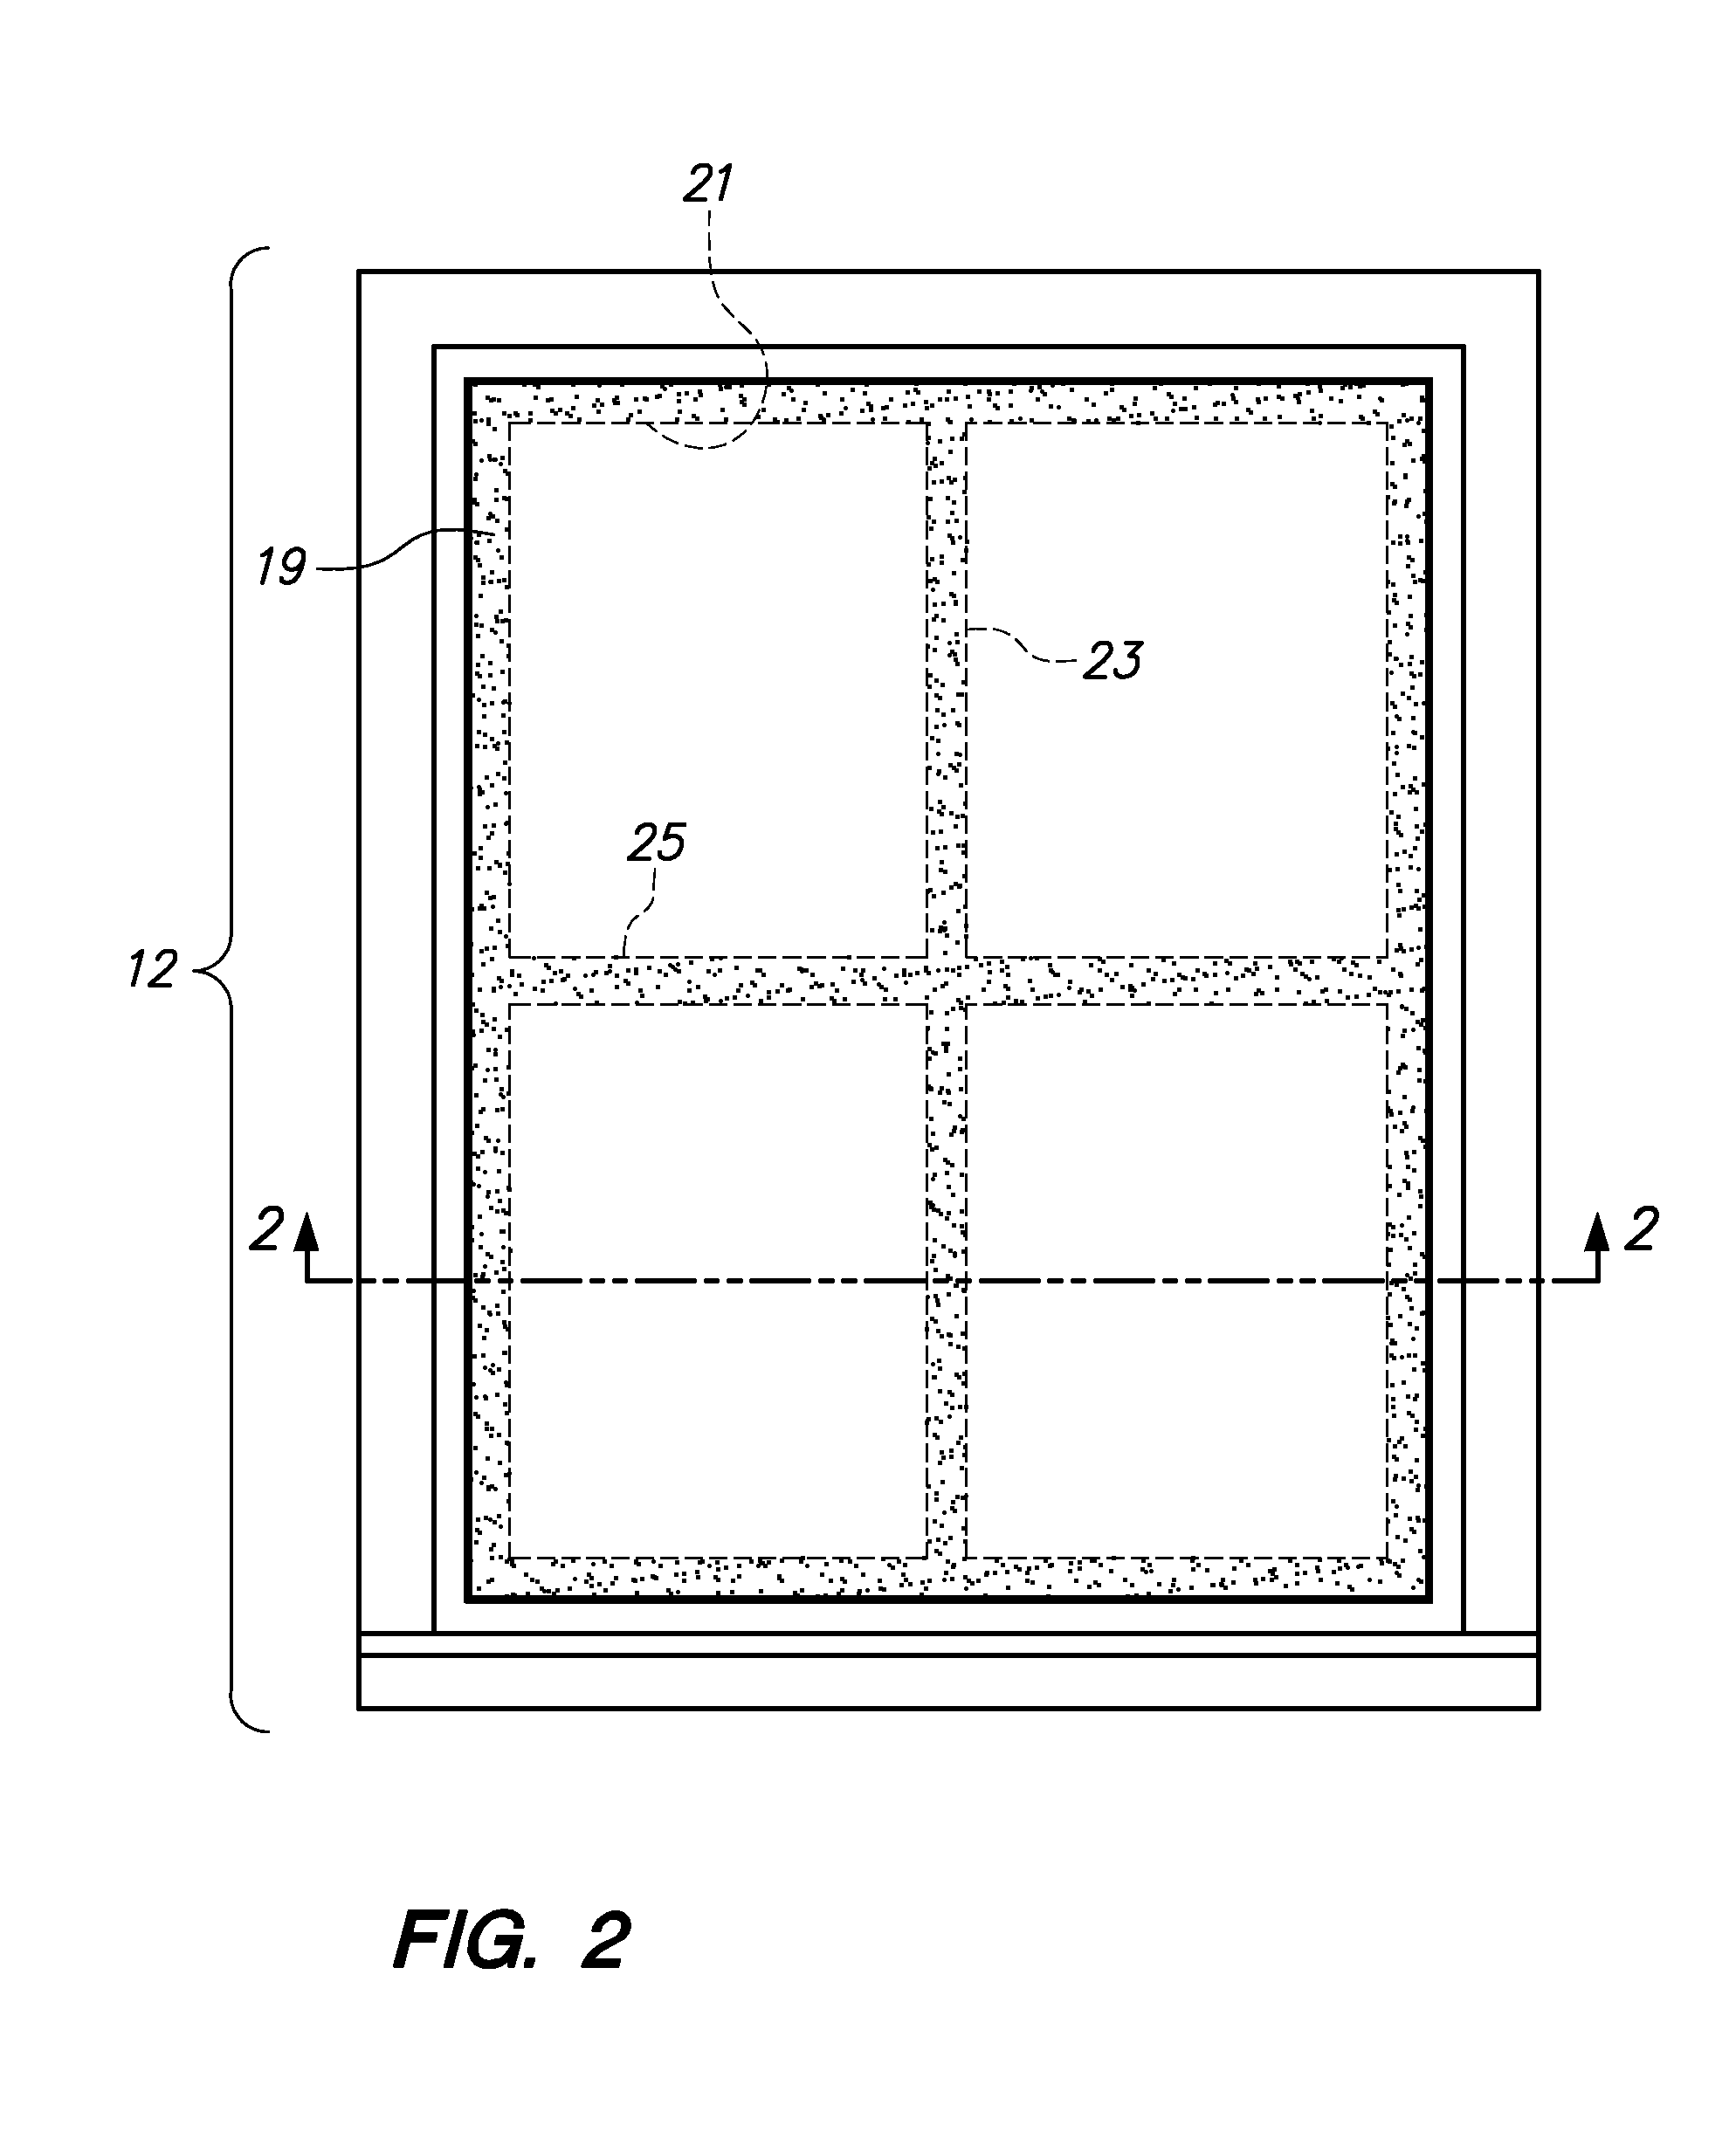 Spectral Selective Solar Control Film Containing an Air Layer for Windows